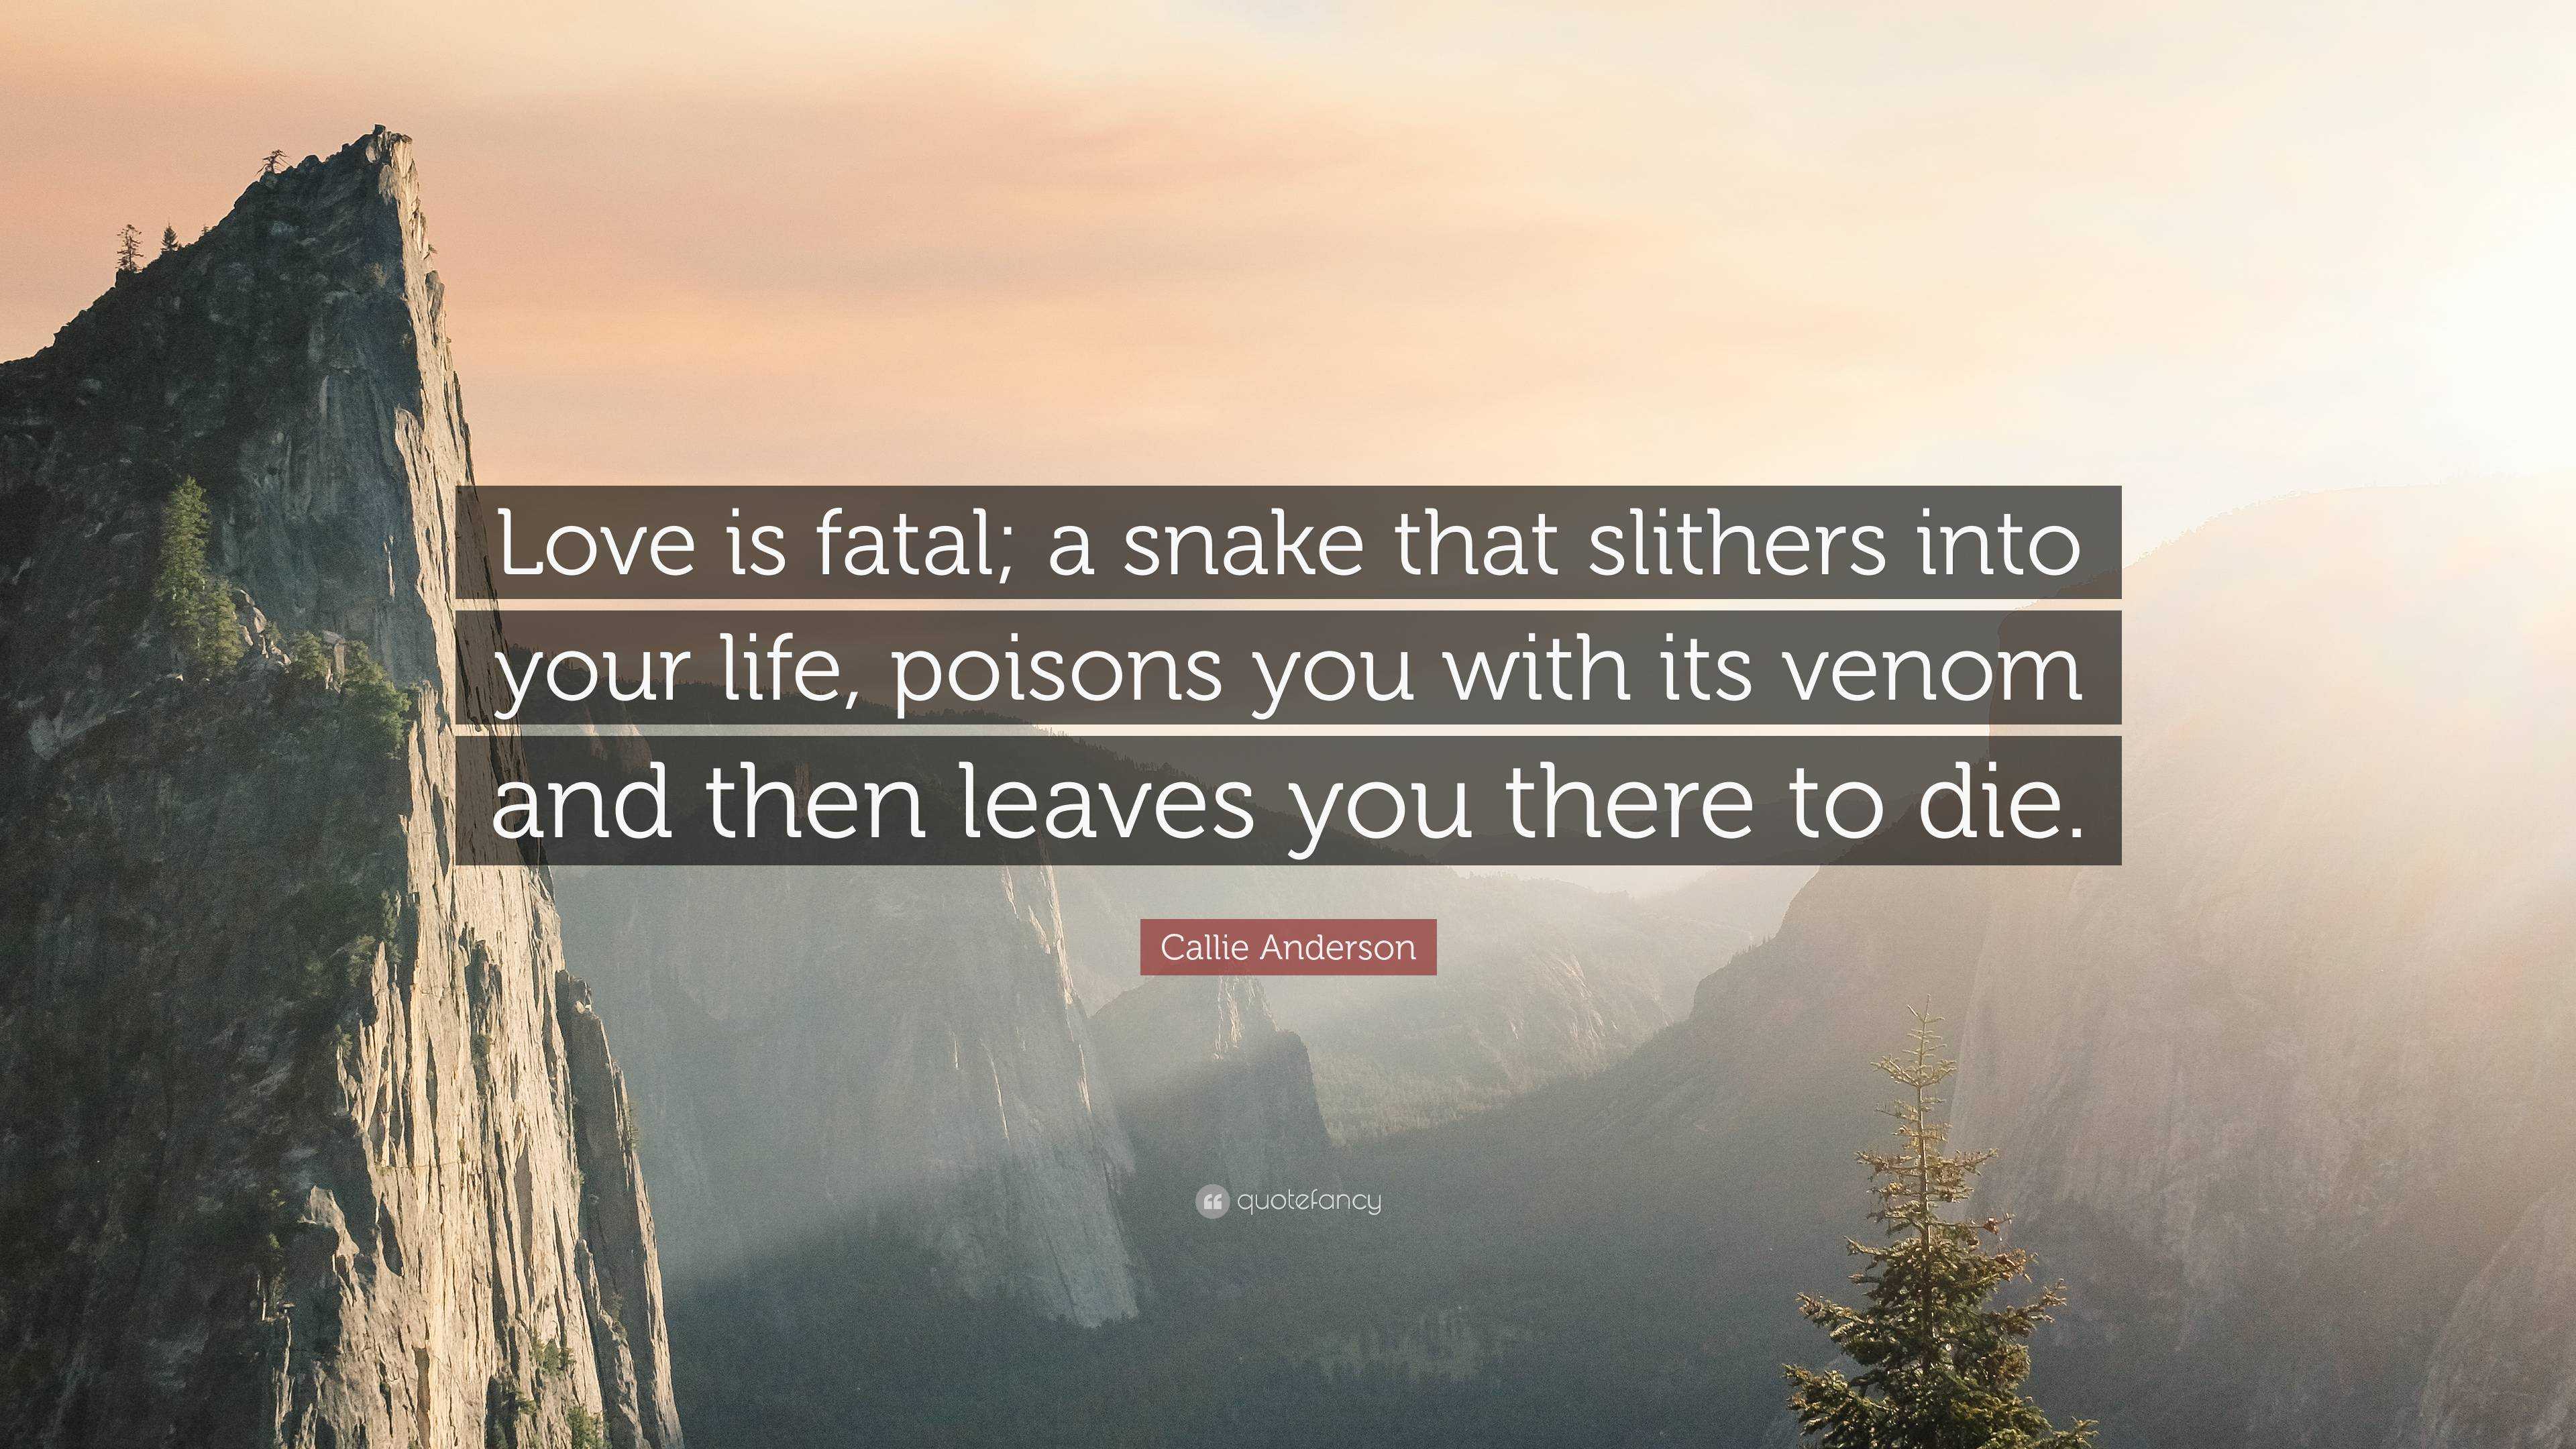 Callie Anderson Quote: “Love is fatal; a snake that slithers into your  life, poisons you with